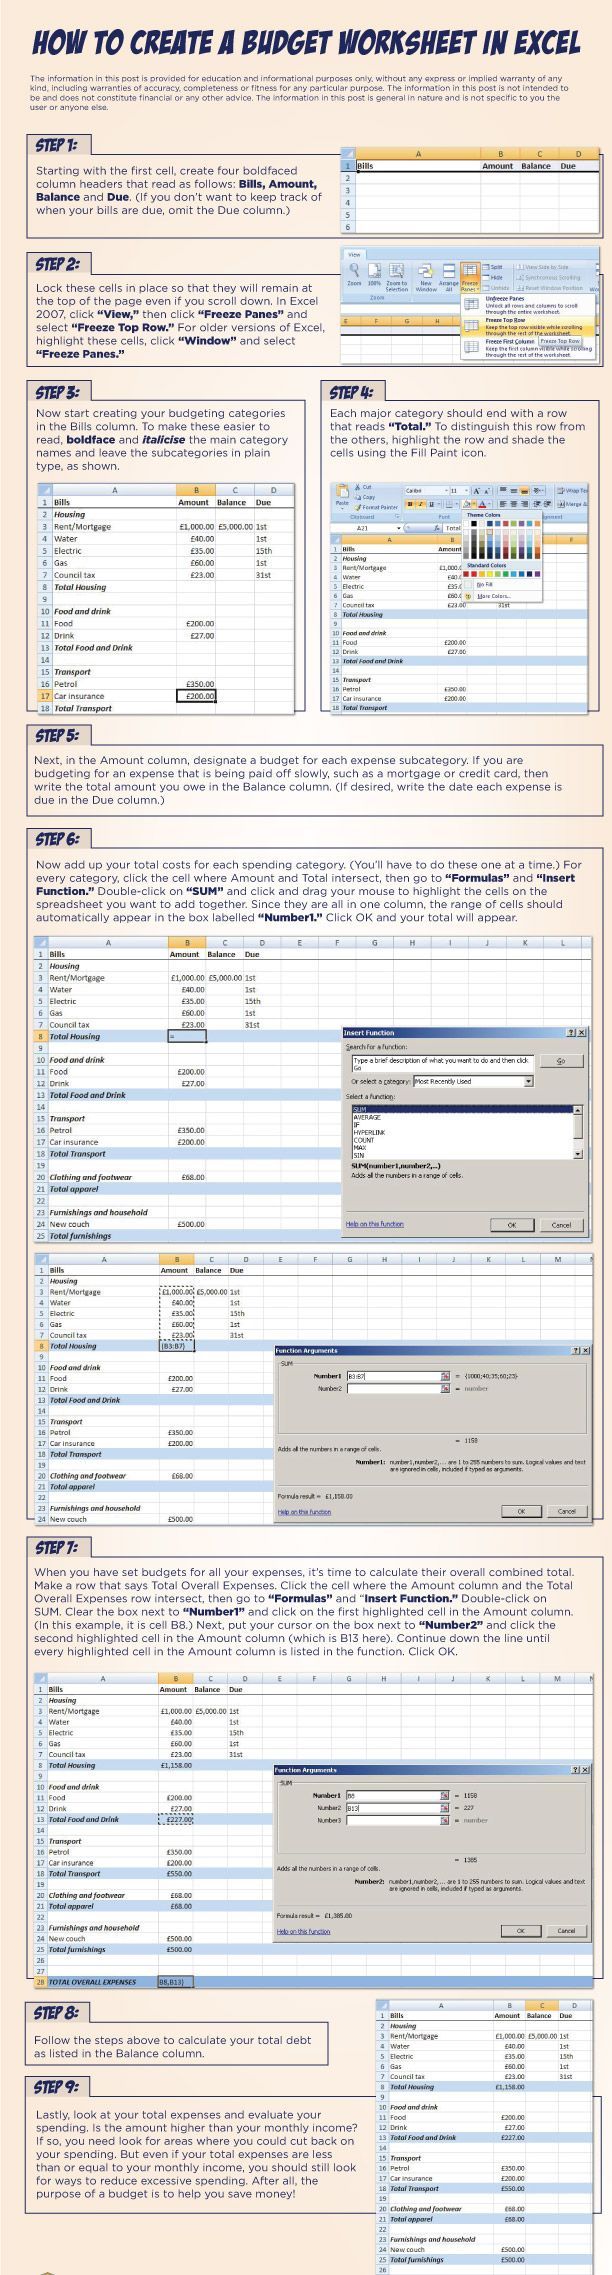 9 step by step instructions on how to create a budget worksheet in excel…